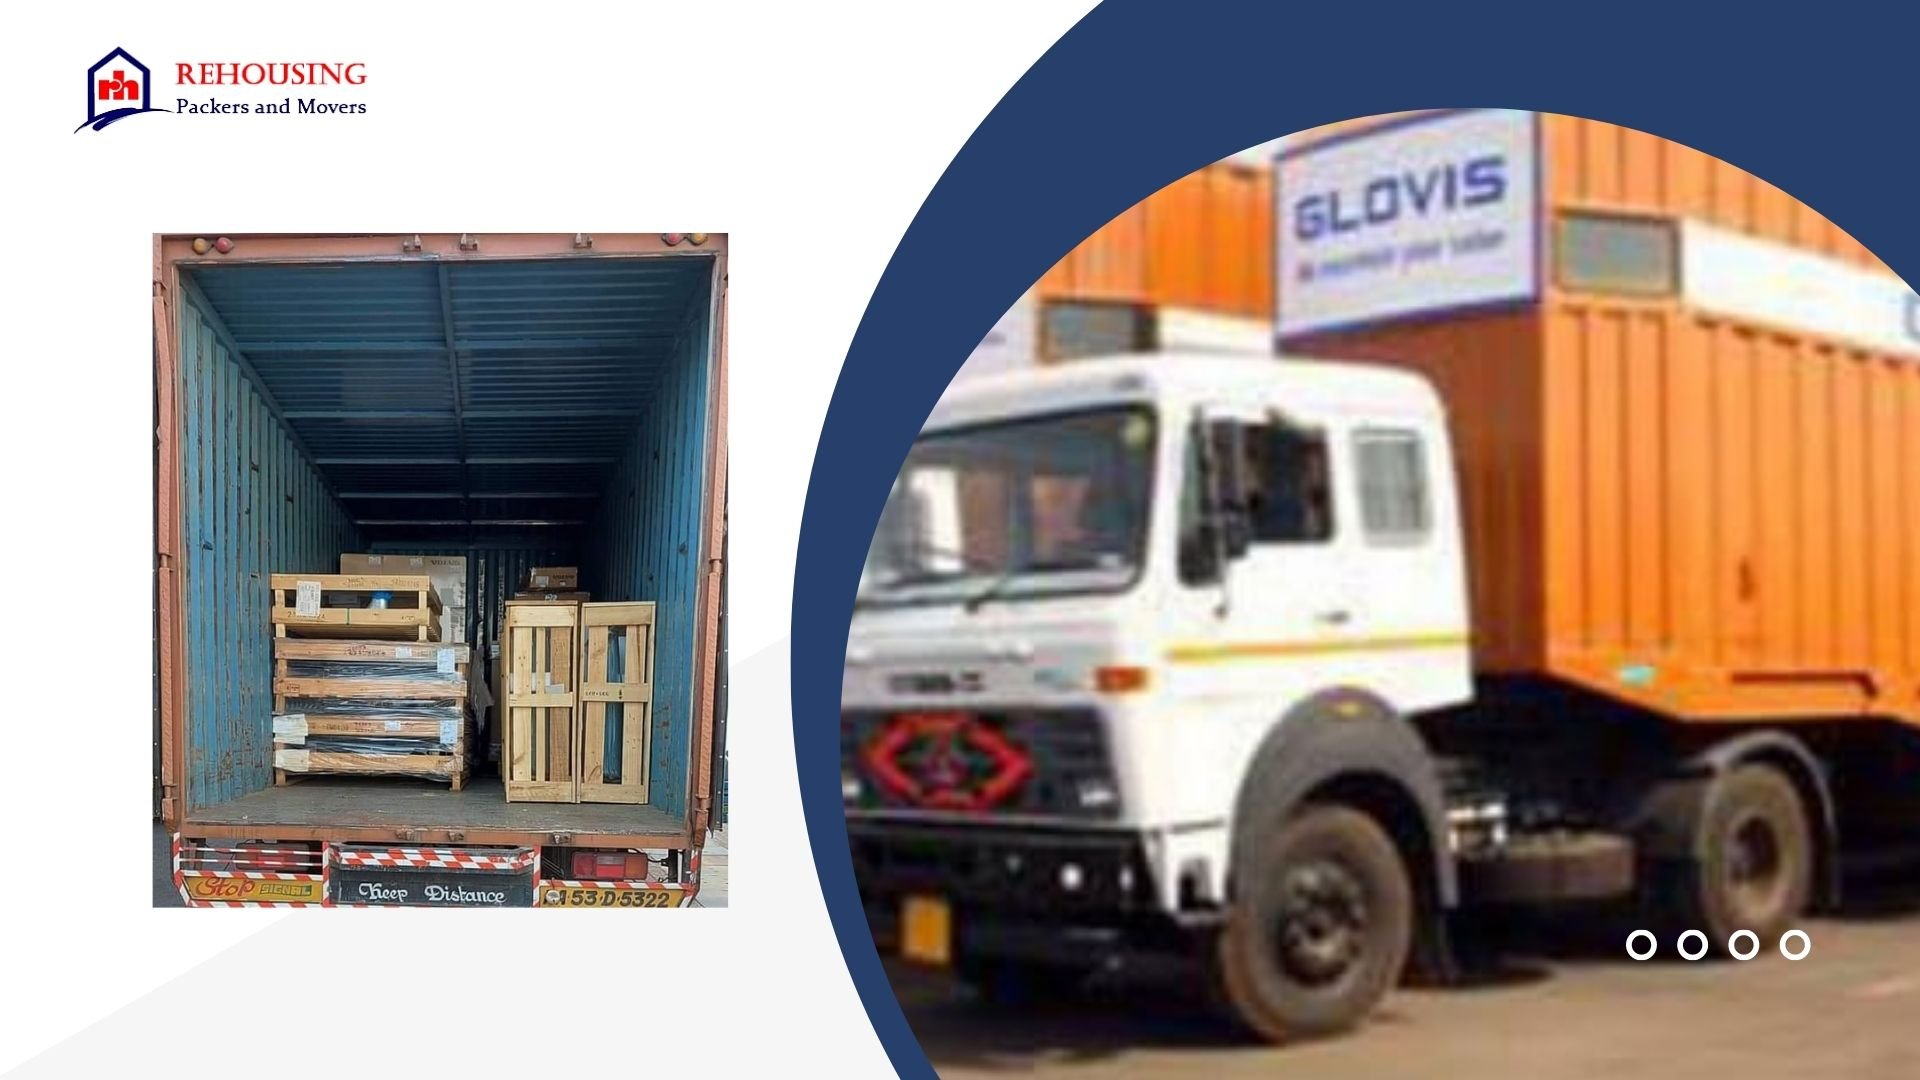 Packers and Movers From Dehradun to Nagpur | Rehousing packers and movers